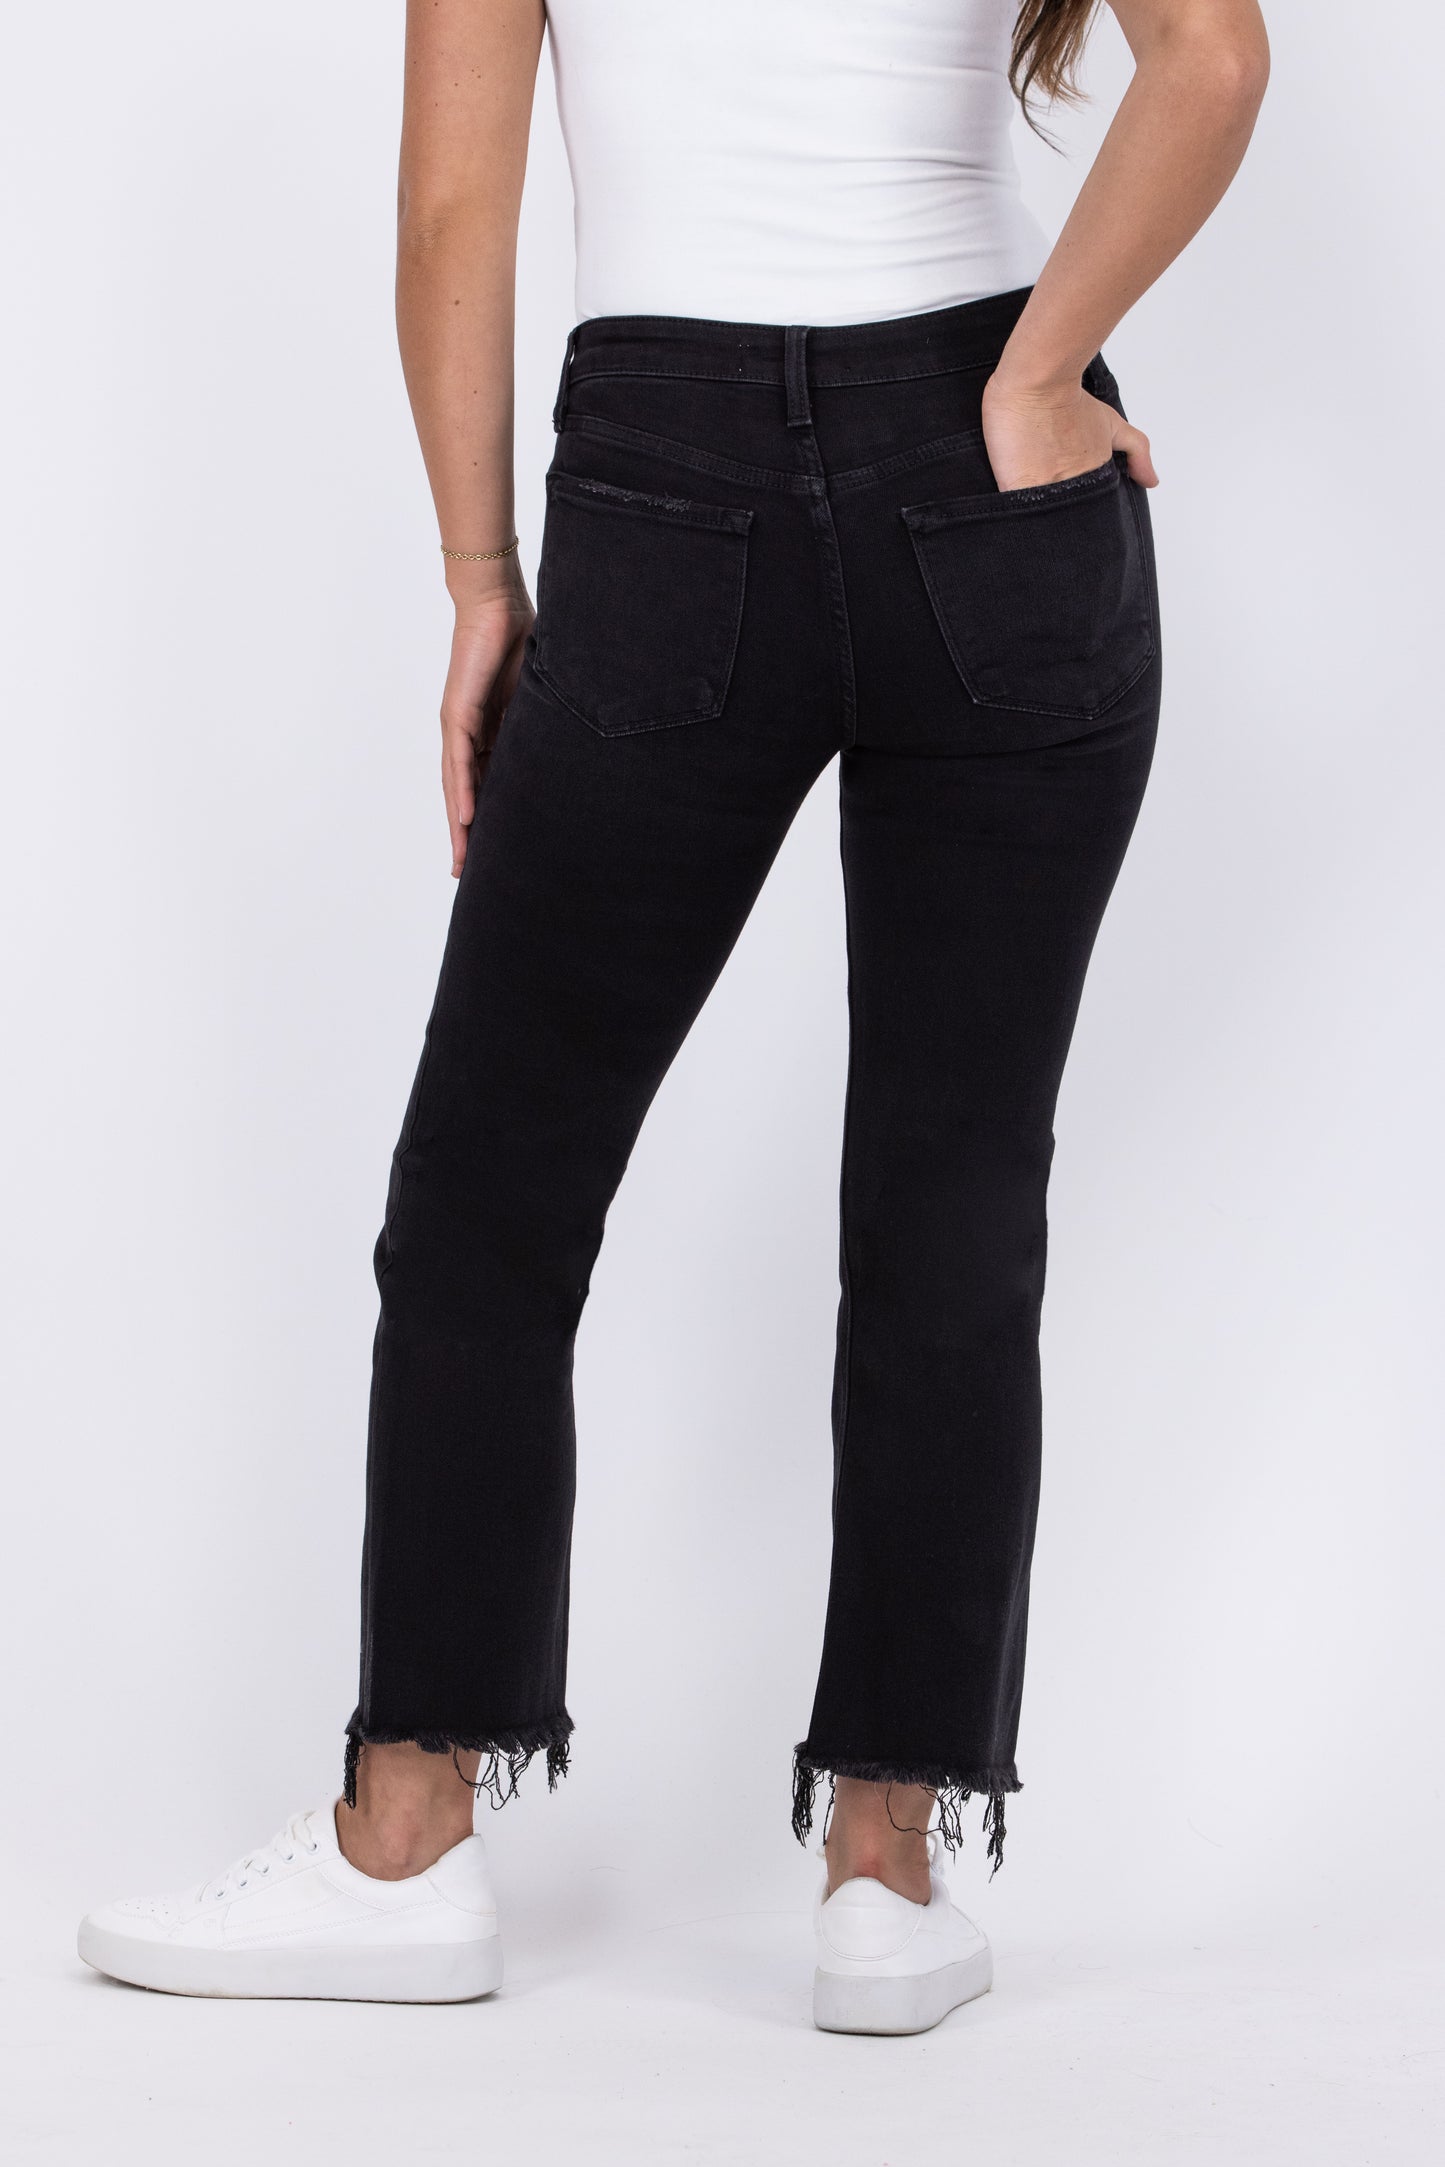 Fraying At The Edge from Lovervet: Mid-Rise Crop Flare Denim